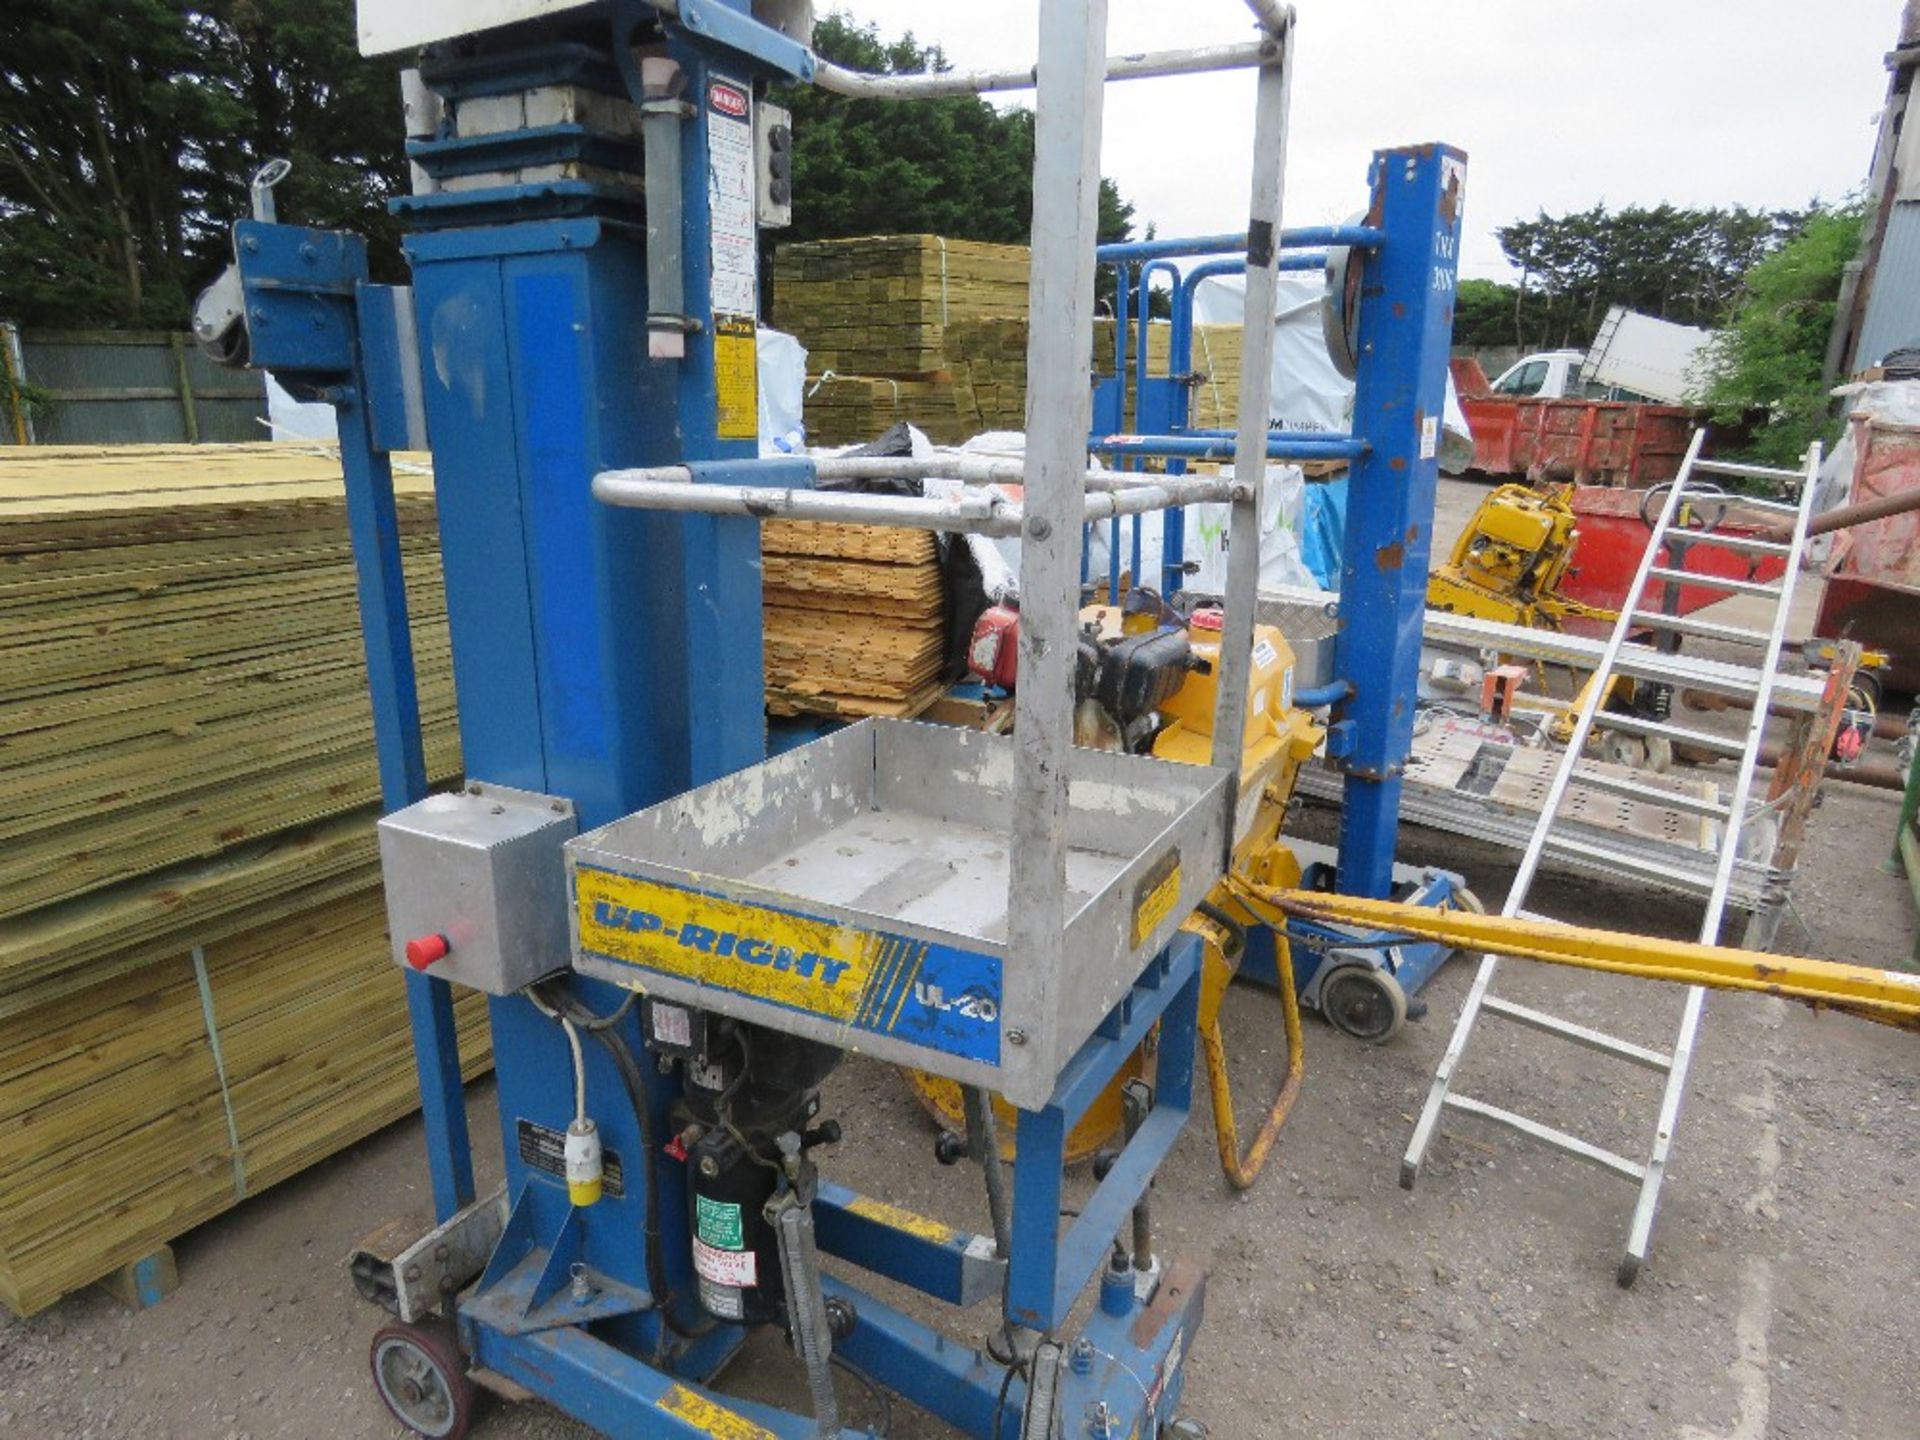 UPRIGHT UL20 MAST LIFT UNIT, 20 FOOT WORK HEIGHT. THIS LOT IS SOLD UNDER THE AUCTIONEERS MARGIN S - Image 3 of 5